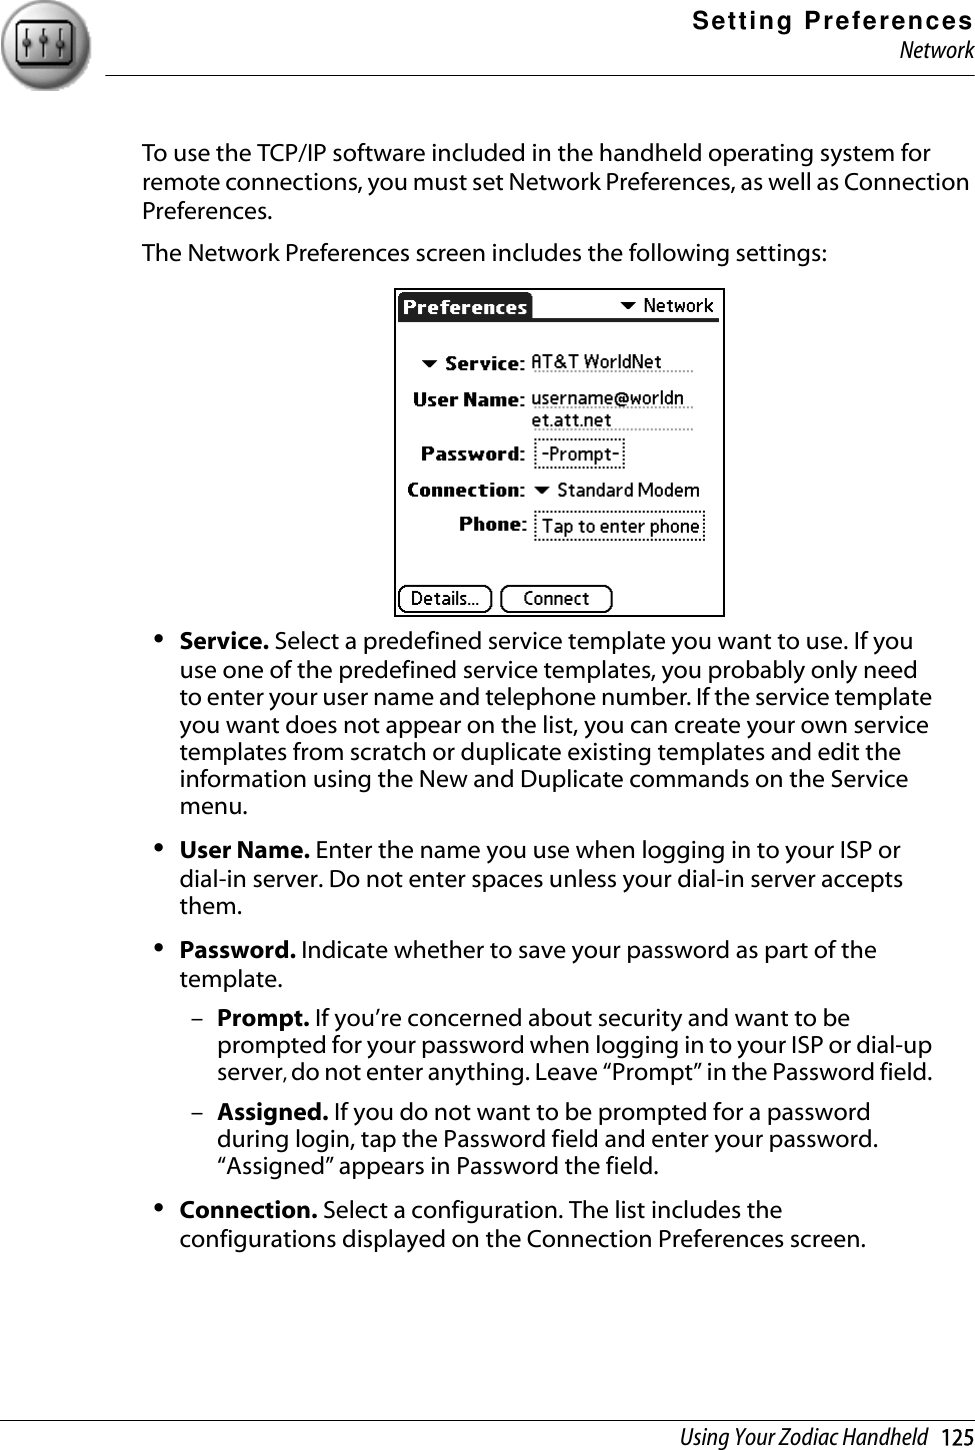 Setting PreferencesNetworkUsing Your Zodiac Handheld   125To use the TCP/IP software included in the handheld operating system for remote connections, you must set Network Preferences, as well as Connection Preferences. The Network Preferences screen includes the following settings:•Service. Select a predefined service template you want to use. If you use one of the predefined service templates, you probably only need to enter your user name and telephone number. If the service template you want does not appear on the list, you can create your own service templates from scratch or duplicate existing templates and edit the information using the New and Duplicate commands on the Service menu.•User Name. Enter the name you use when logging in to your ISP or dial-in server. Do not enter spaces unless your dial-in server accepts them.•Password. Indicate whether to save your password as part of the template. –Prompt. If you’re concerned about security and want to be prompted for your password when logging in to your ISP or dial-up server, do not enter anything. Leave “Prompt” in the Password field. –Assigned. If you do not want to be prompted for a password during login, tap the Password field and enter your password. “Assigned” appears in Password the field.•Connection. Select a configuration. The list includes the configurations displayed on the Connection Preferences screen.